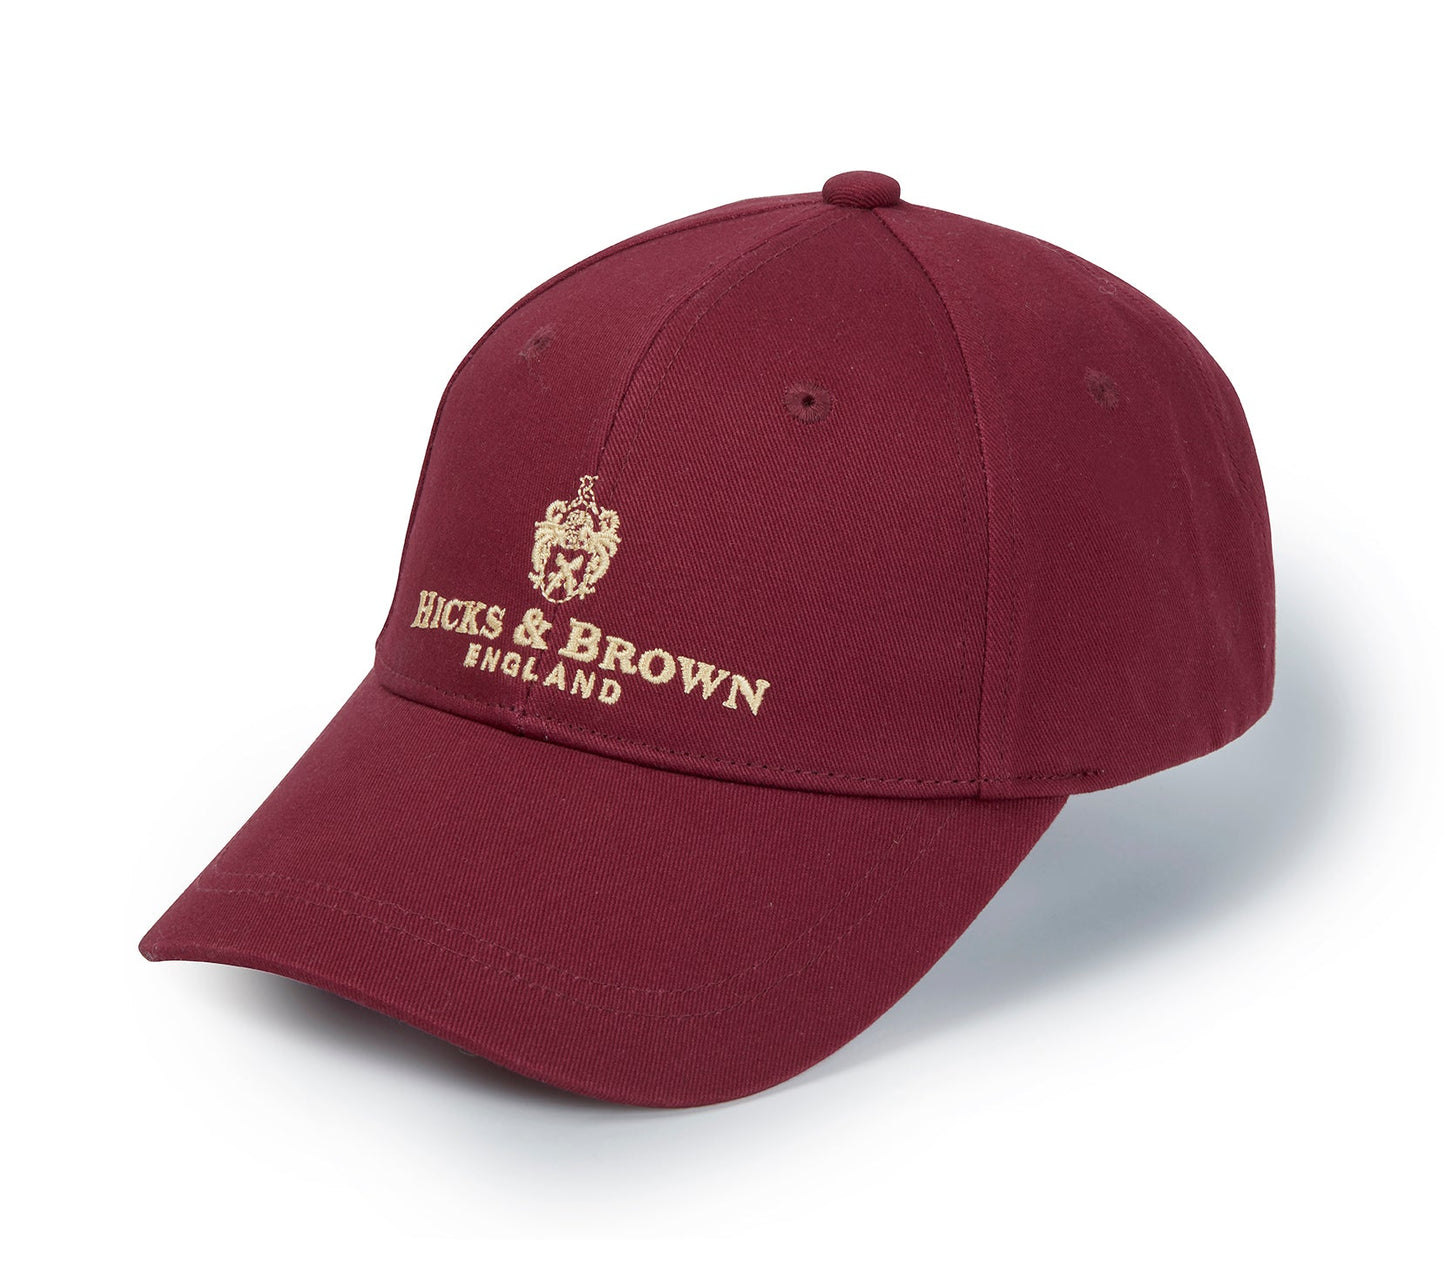 Hicks & Brown The Cotton Baseball Cap in Maroon